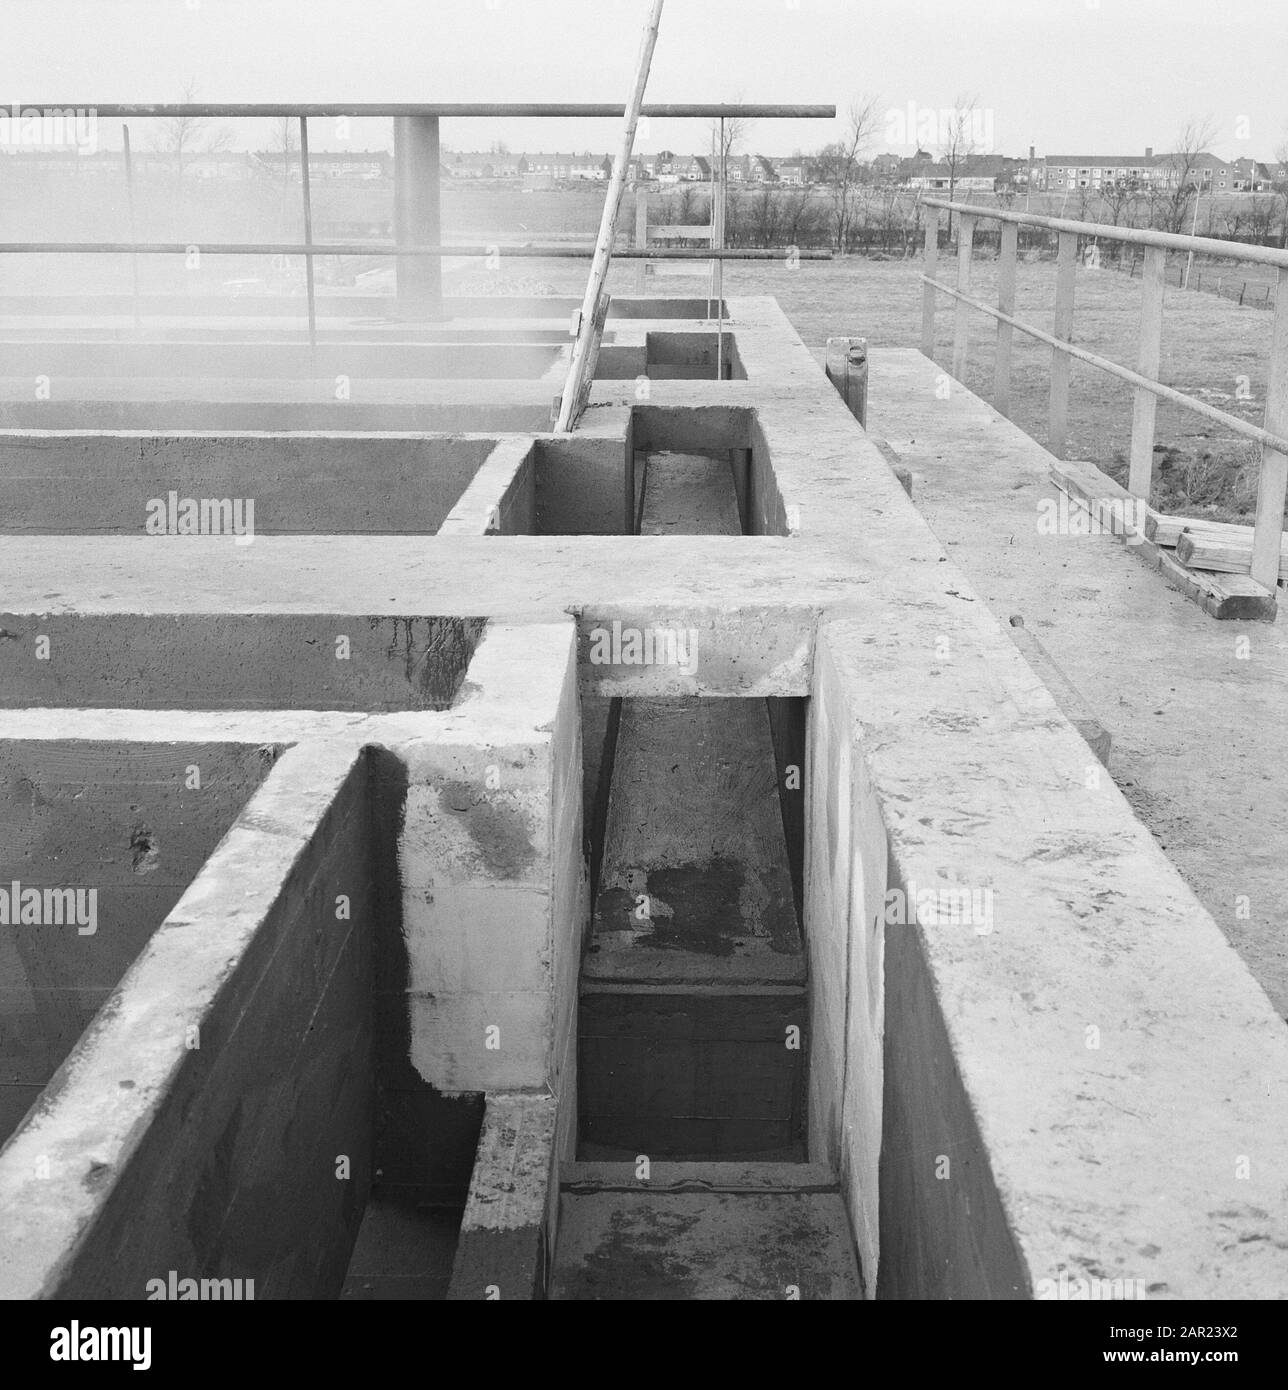 cleaning wastewater, treatment of urban waste, sewage treatment plants Date: 1965 Location: Den Oever Keywords: cleaning wastewater, sewage treatment plants, processing urban waste Stock Photo